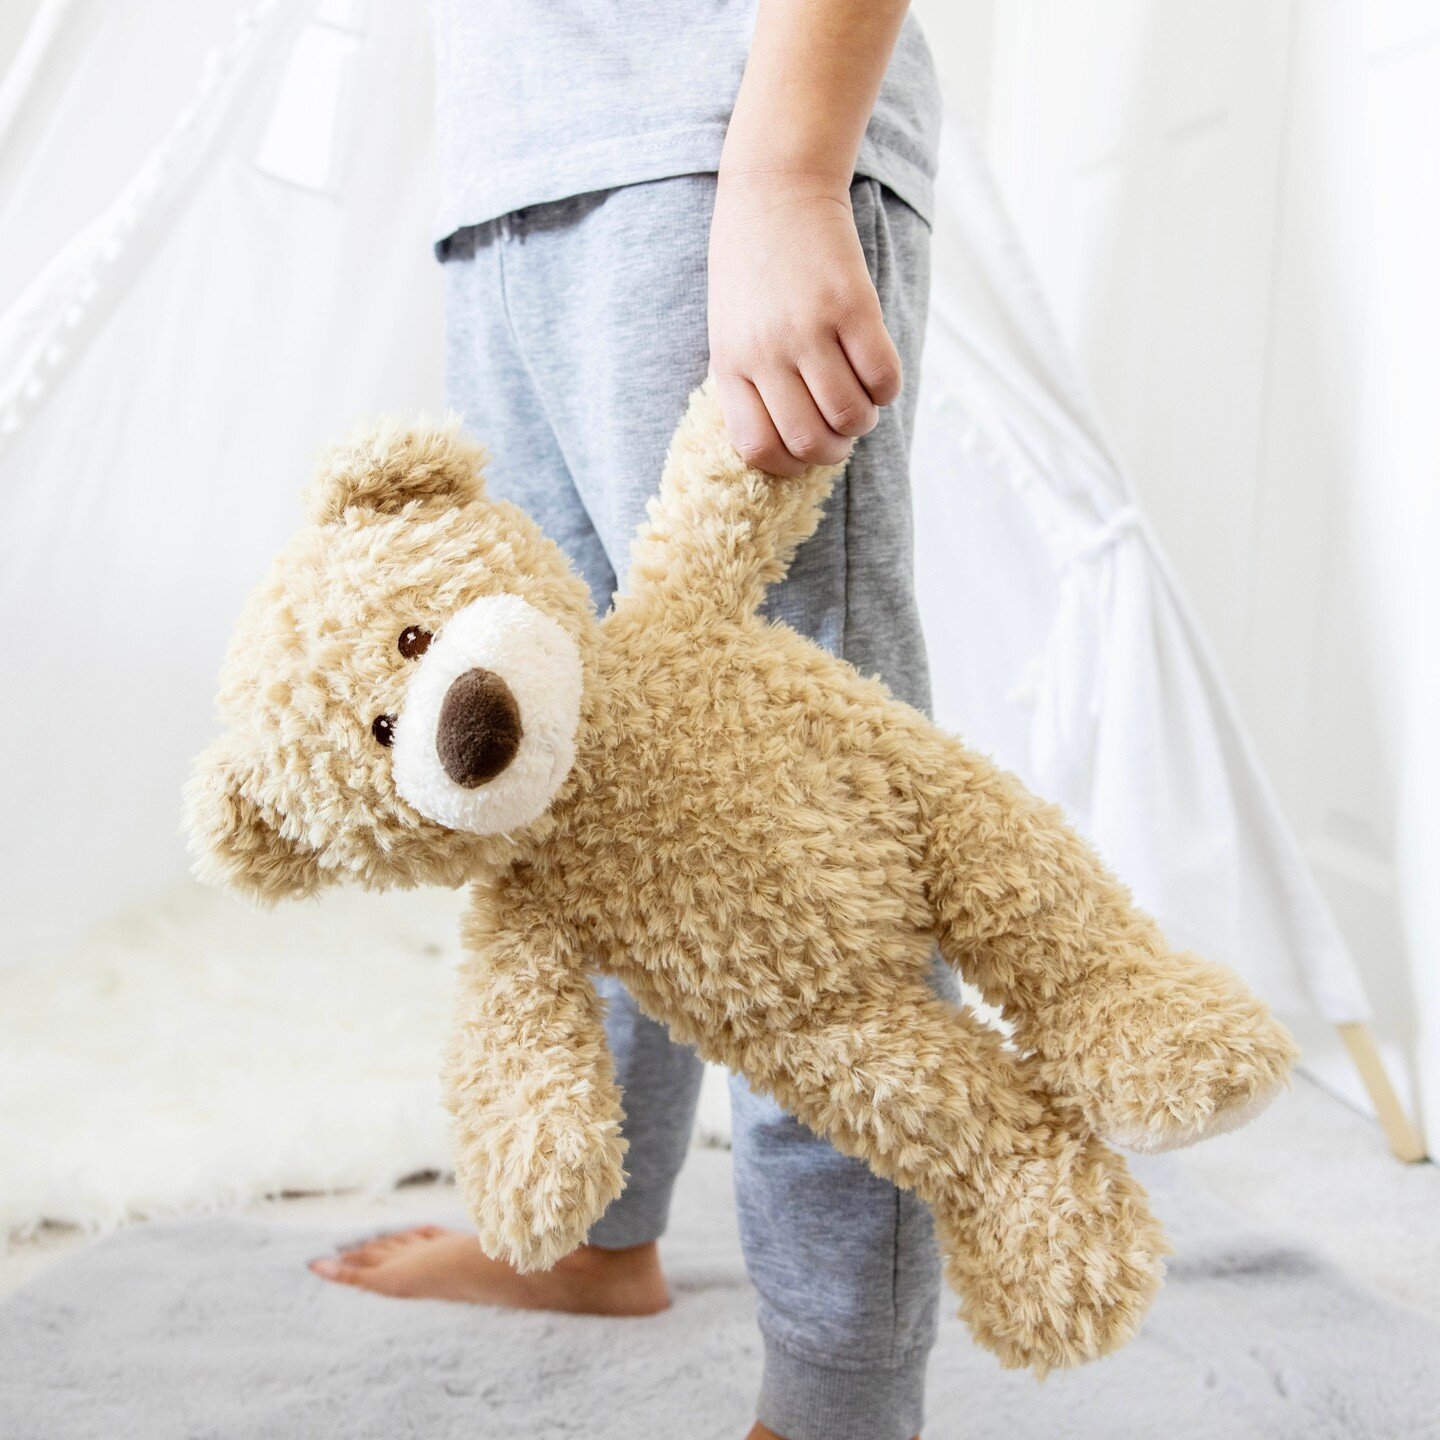 Soft, cuddly and adorable, DesignaBear soft toys inspire a world of make-believe, imaginative role-play and friendship. The collection also includes quality outfits and accessories which further enhance role-playing fun.✨

#designabear #plushie #plus